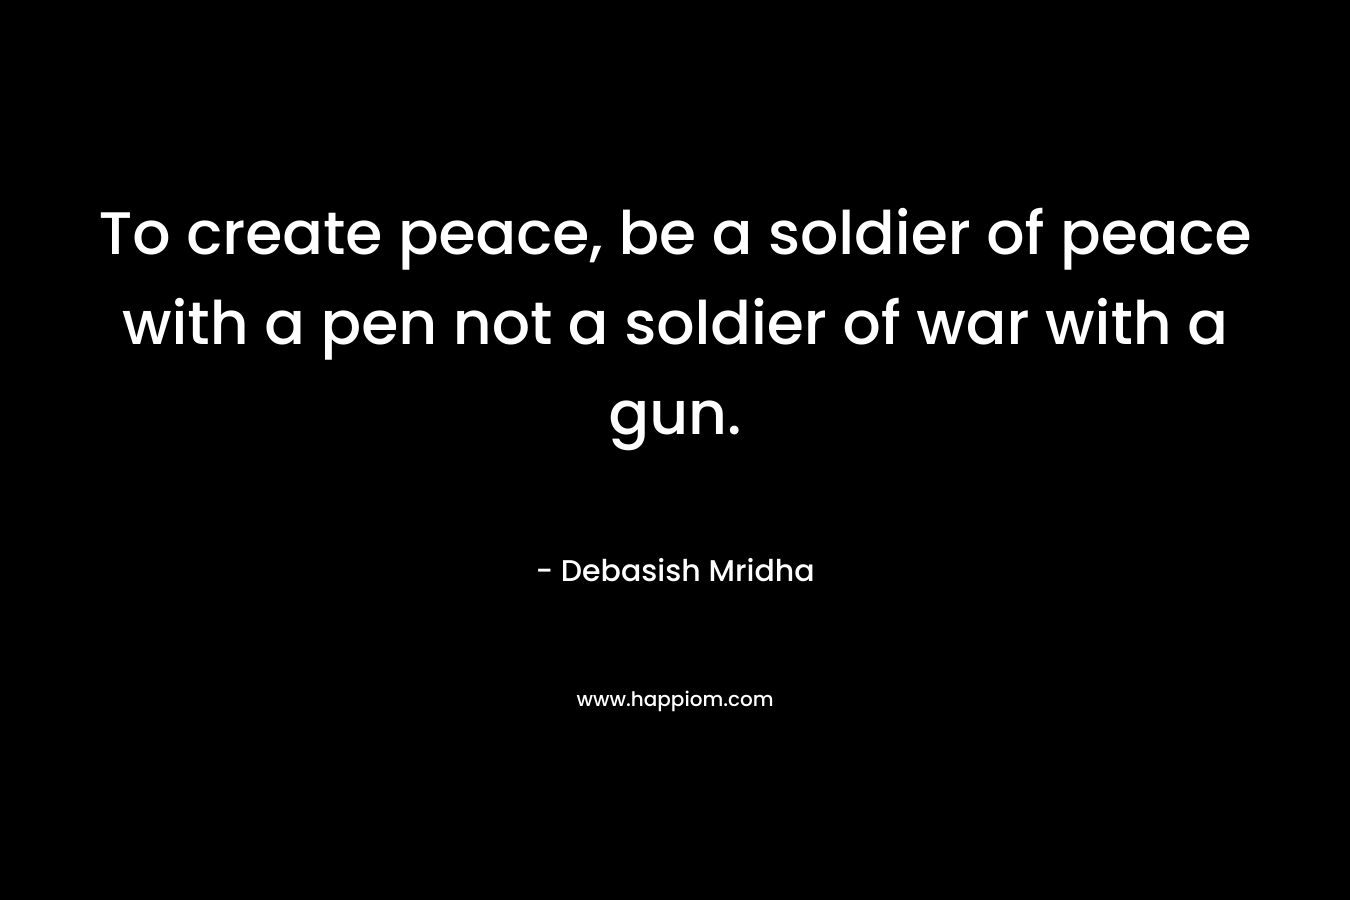 To create peace, be a soldier of peace with a pen not a soldier of war with a gun.